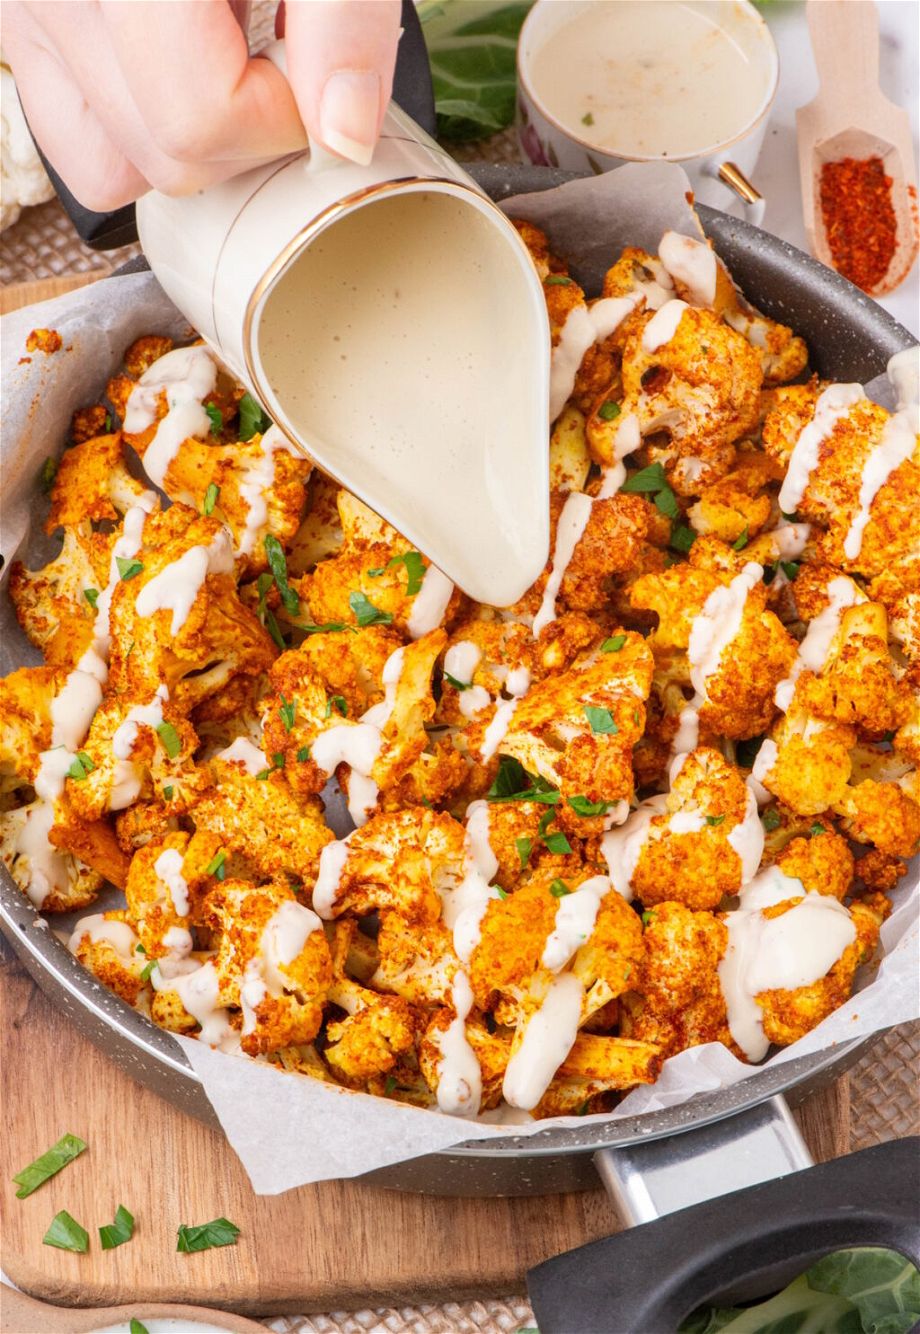 the Oil-free Oven Roasted Cauliflower in a pan and a hand is pouring sauce on top of them.